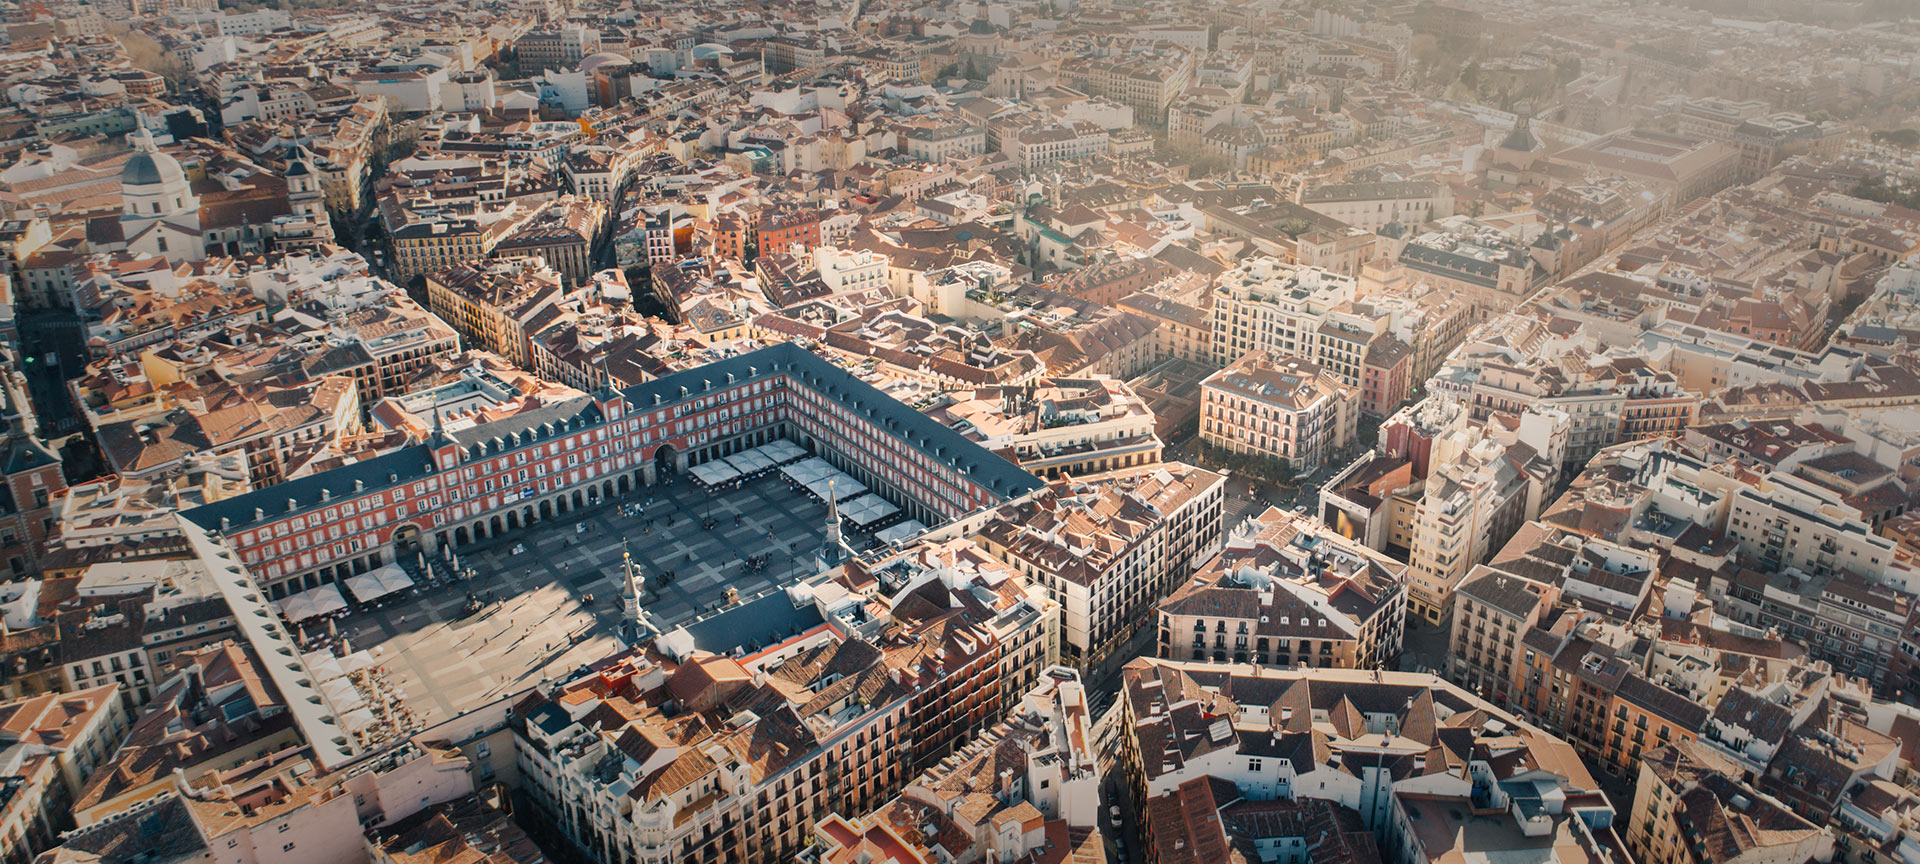 Aerial view of the Plaza Mayor square and the city of Madrid